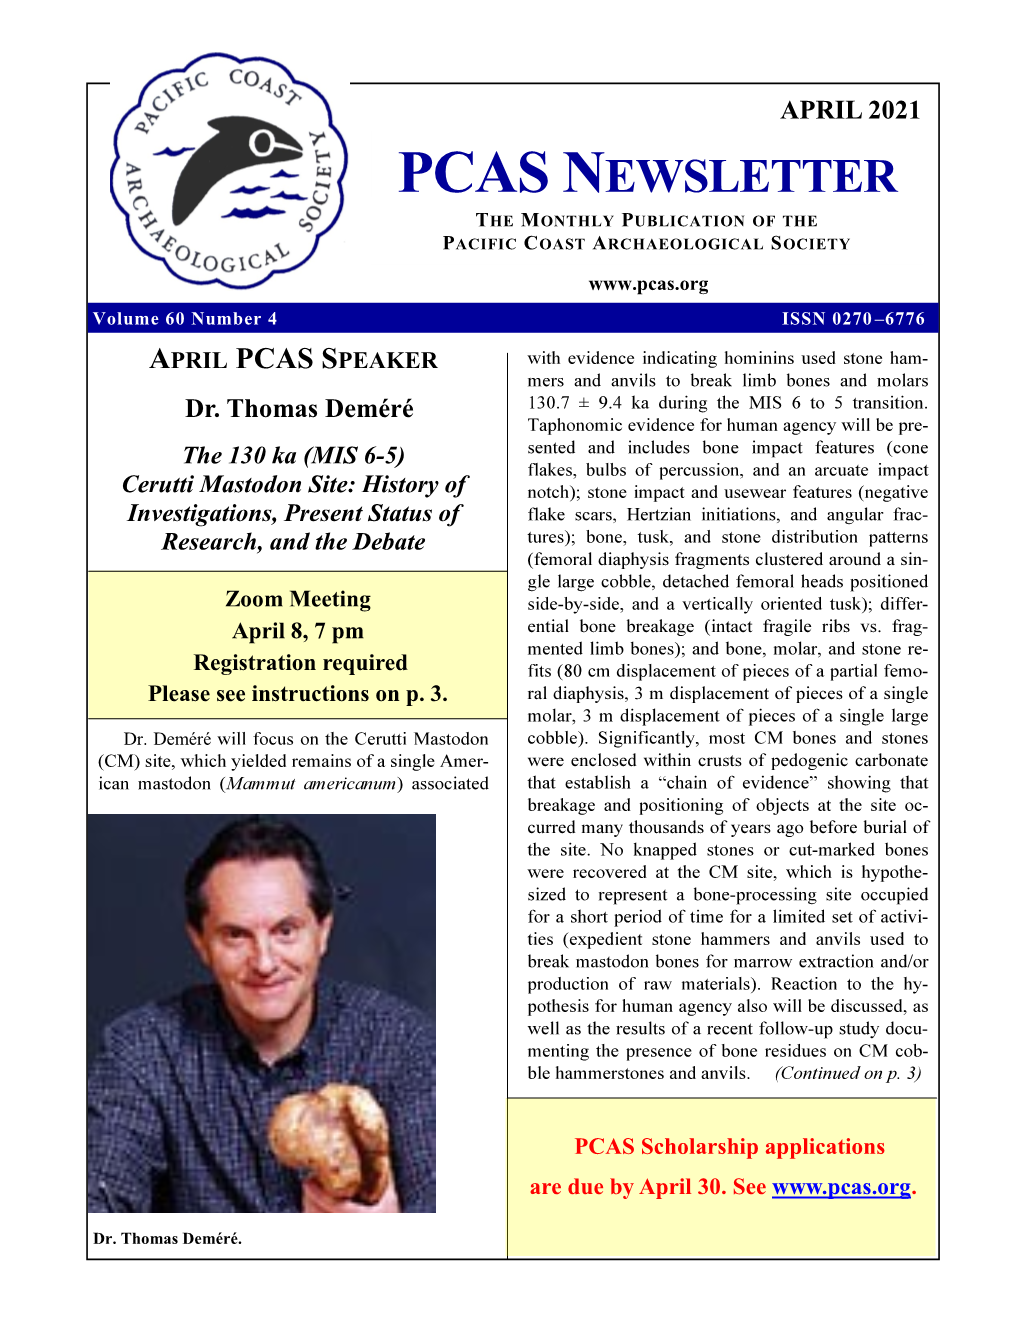 April 2021 Pcas Newsletter the Monthly Publication of the Pacific Coast Archaeological Society